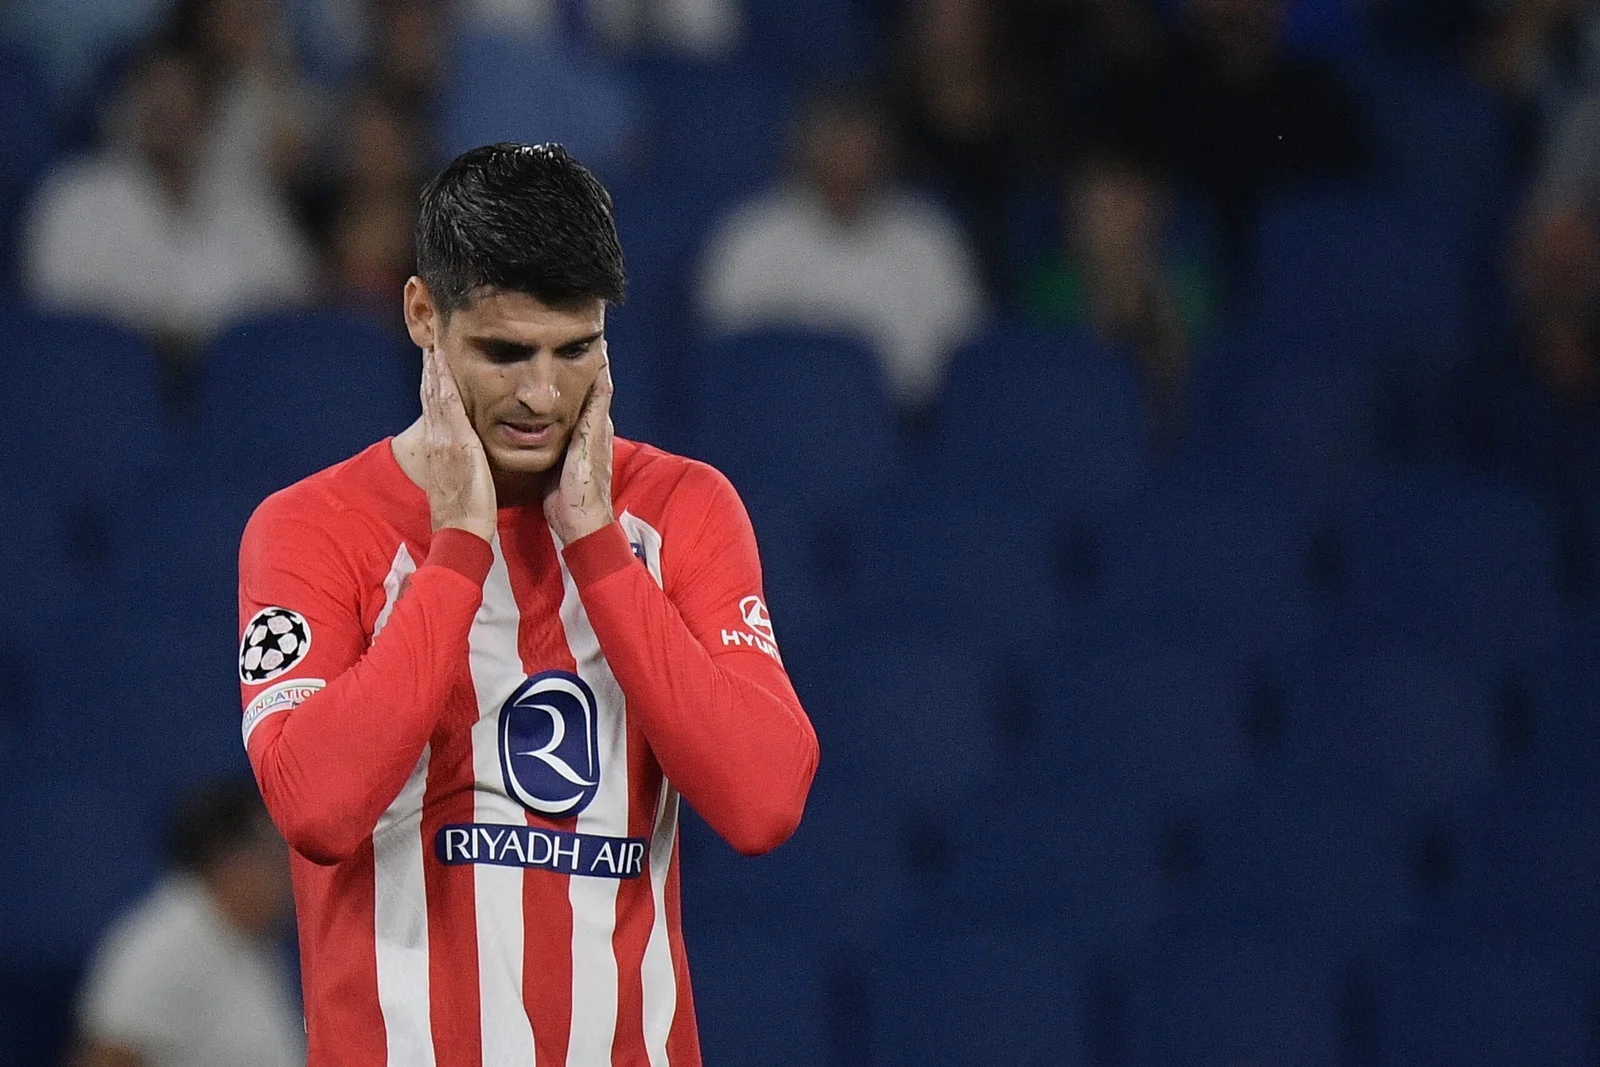 Alvaro Morata had a busy summer as several Serie A teams inquired about him, but he ended up staying put at Atletico Madrid